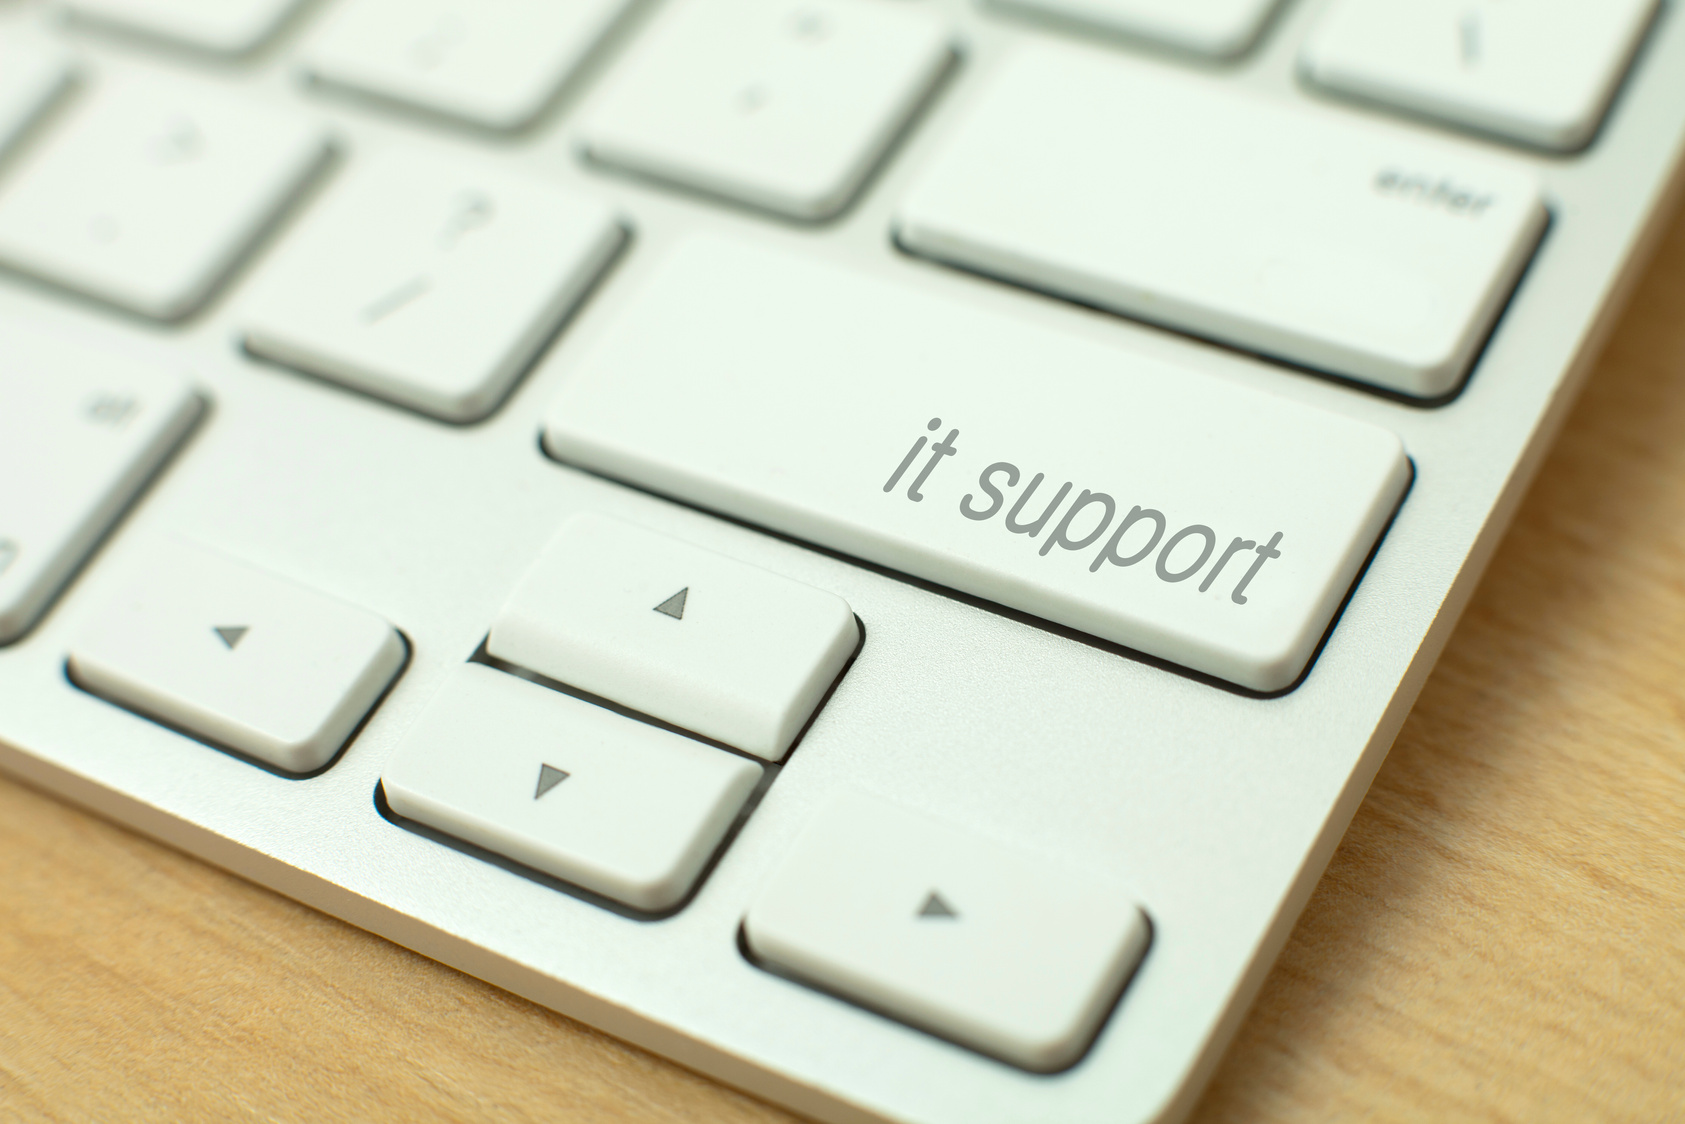 it support on the computer keyboard